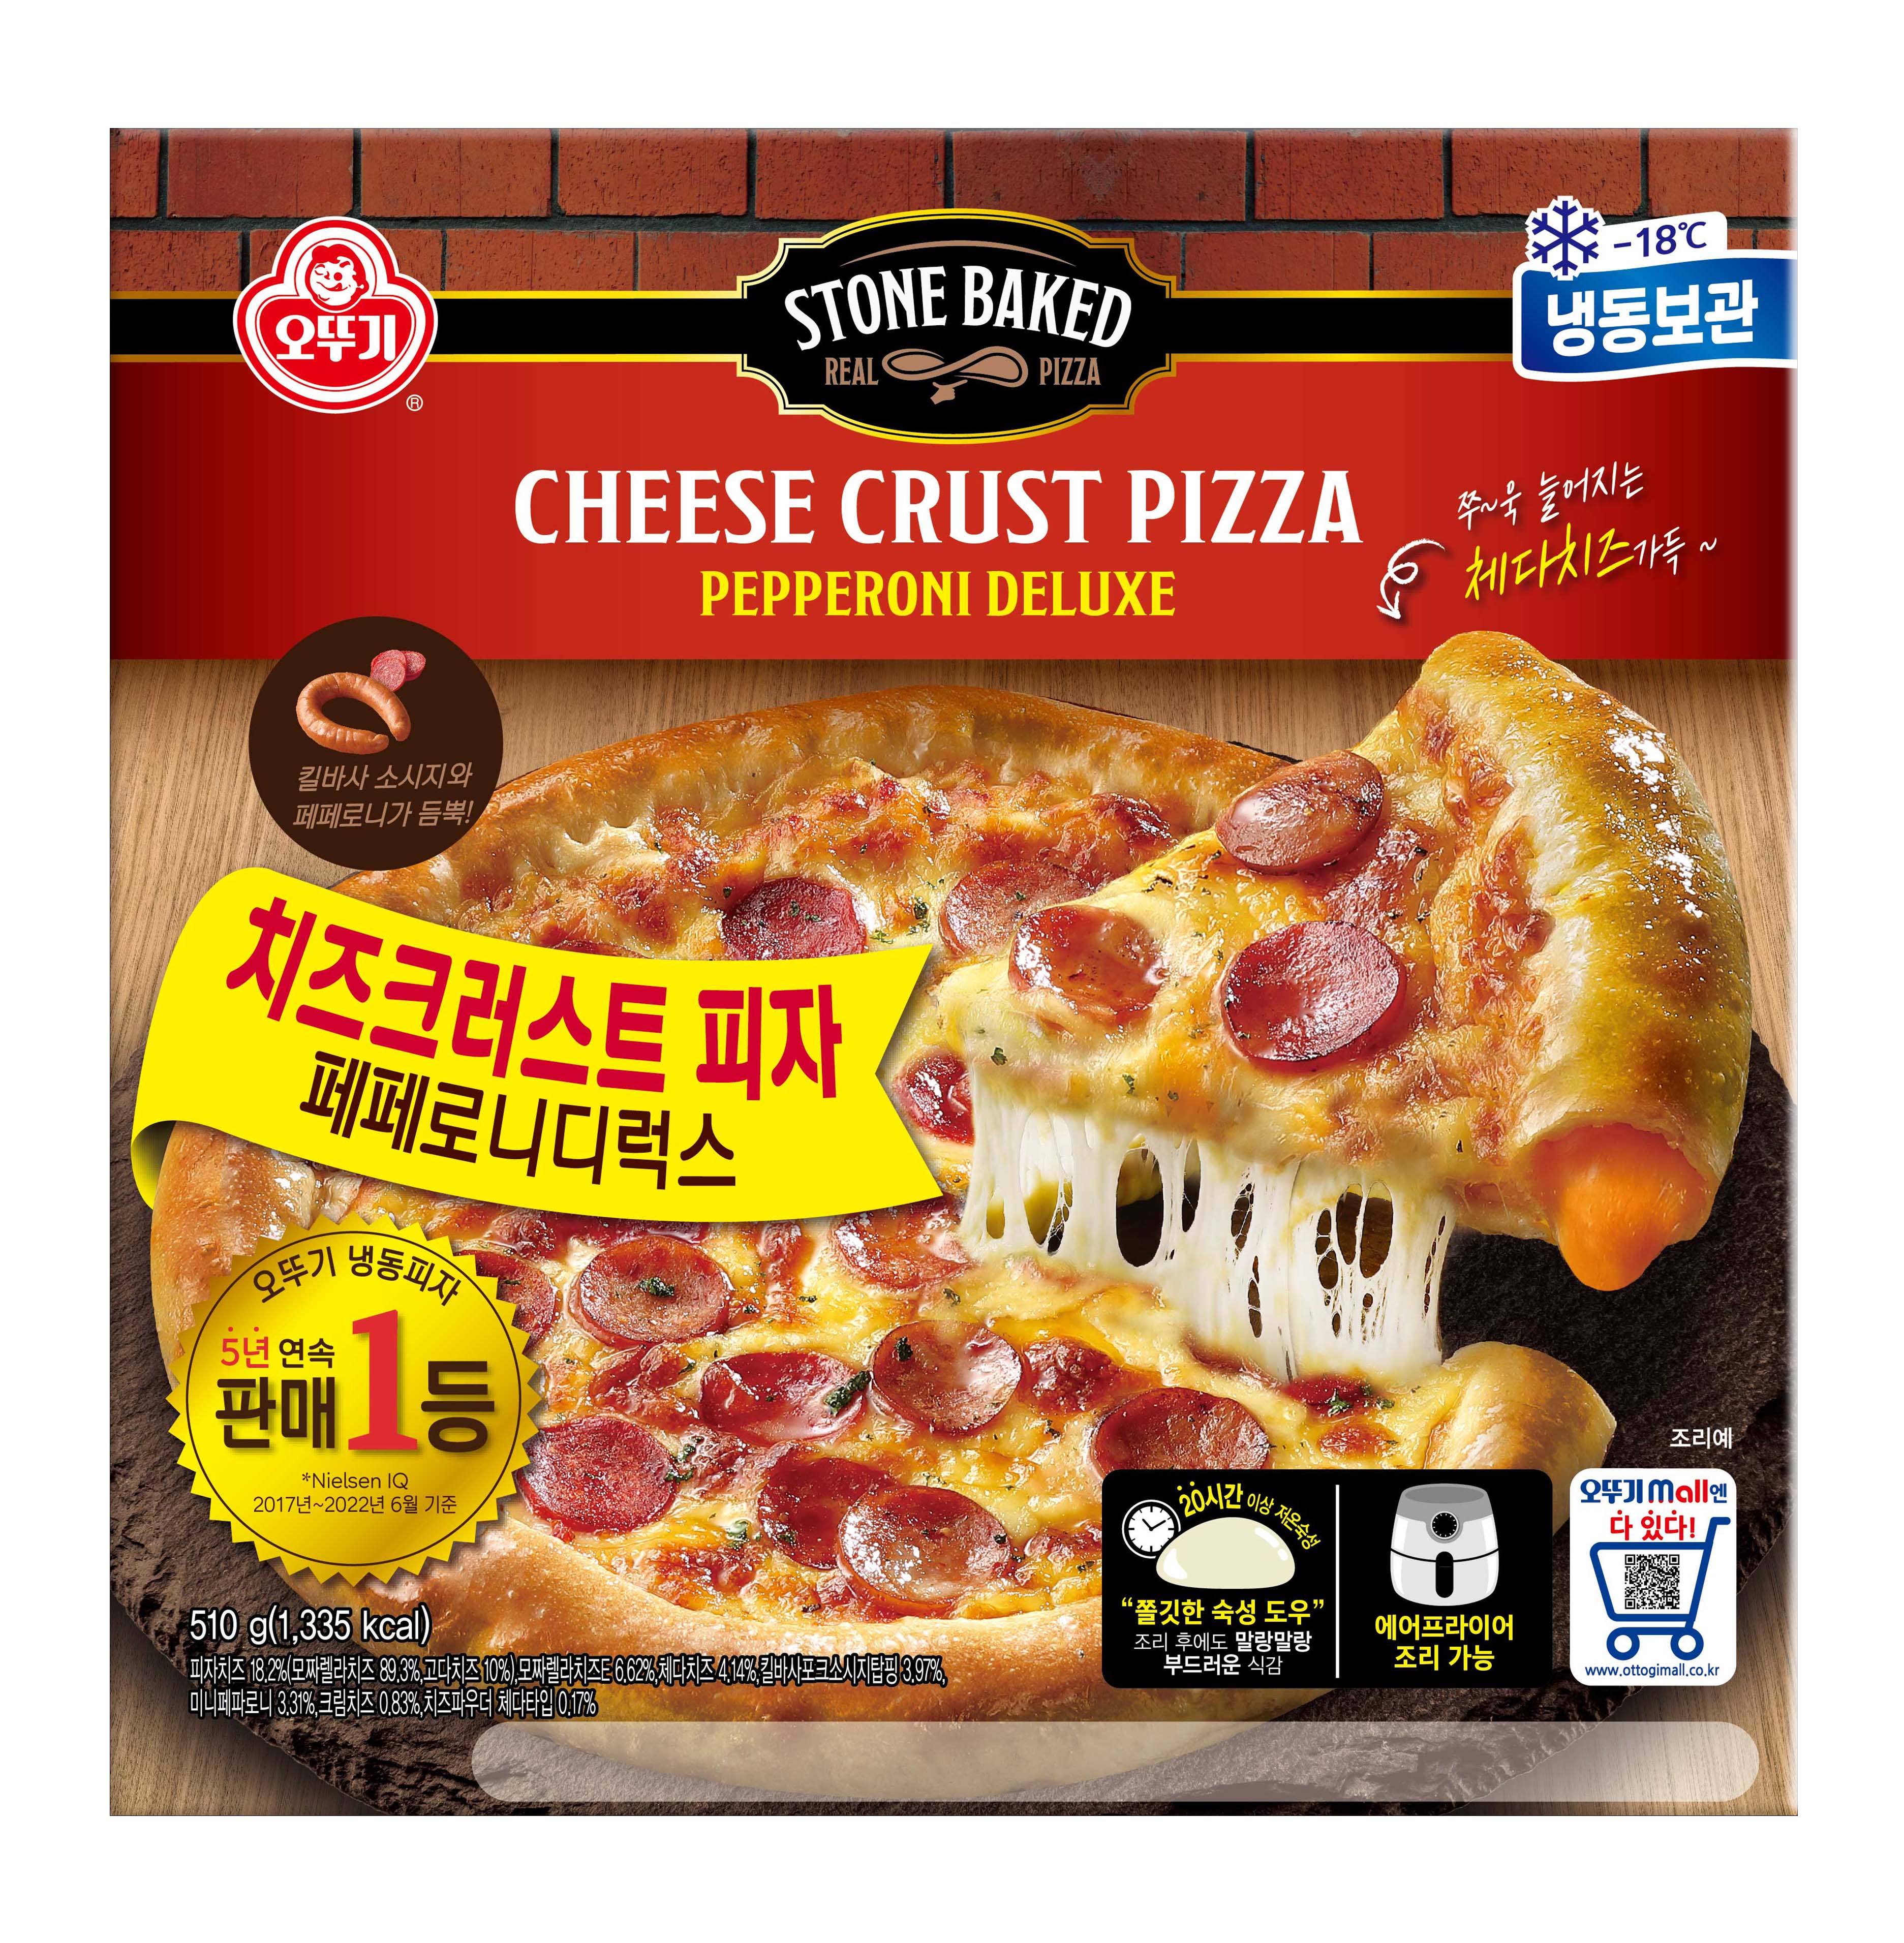 PEPPERONI DELUX CHEESE CRUST PIZZA